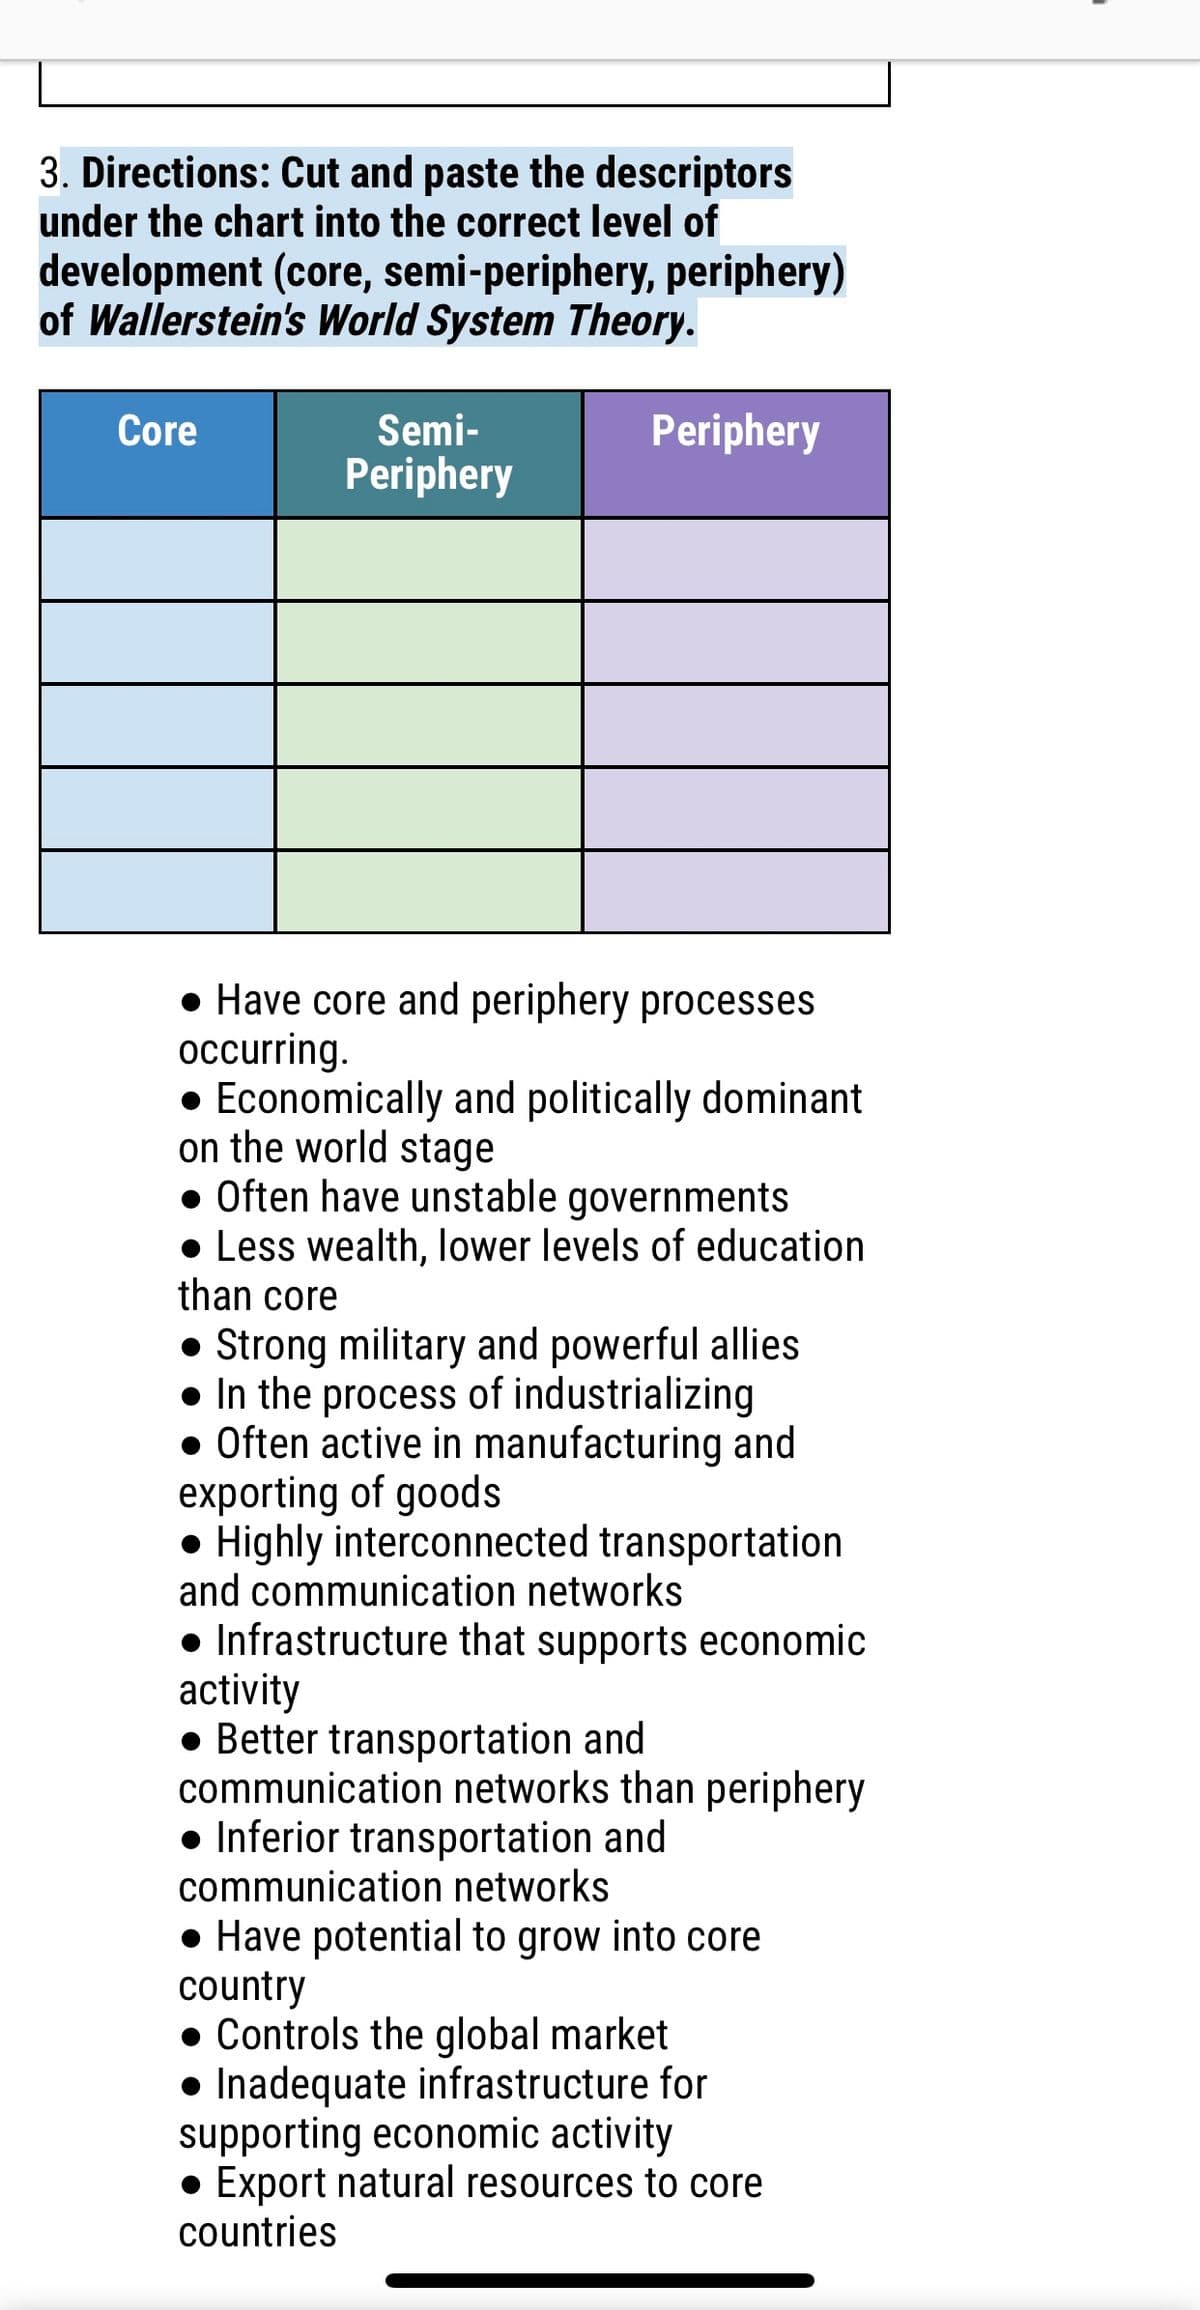 3. Directions: Cut and paste the descriptors
under the chart into the correct level of
development (core, semi-periphery, periphery)
of Wallerstein's World System Theory.
Core
Semi-
Periphery
Periphery
• Have core and periphery processes
occurring.
• Economically and politically dominant
on the world stage
• Often have unstable governments
• Less wealth, lower levels of education
than core
• Strong military and powerful allies
• In the process of industrializing
• Often active in manufacturing and
exporting of goods
• Highly interconnected transportation
and communication networks
• Infrastructure that supports economic
activity
• Better transportation and
communication networks than periphery
• Inferior transportation and
communication networks
• Have potential to grow into core
country
• Controls the global market
• Inadequate infrastructure for
supporting economic activity
• Export natural resources to core
countries
